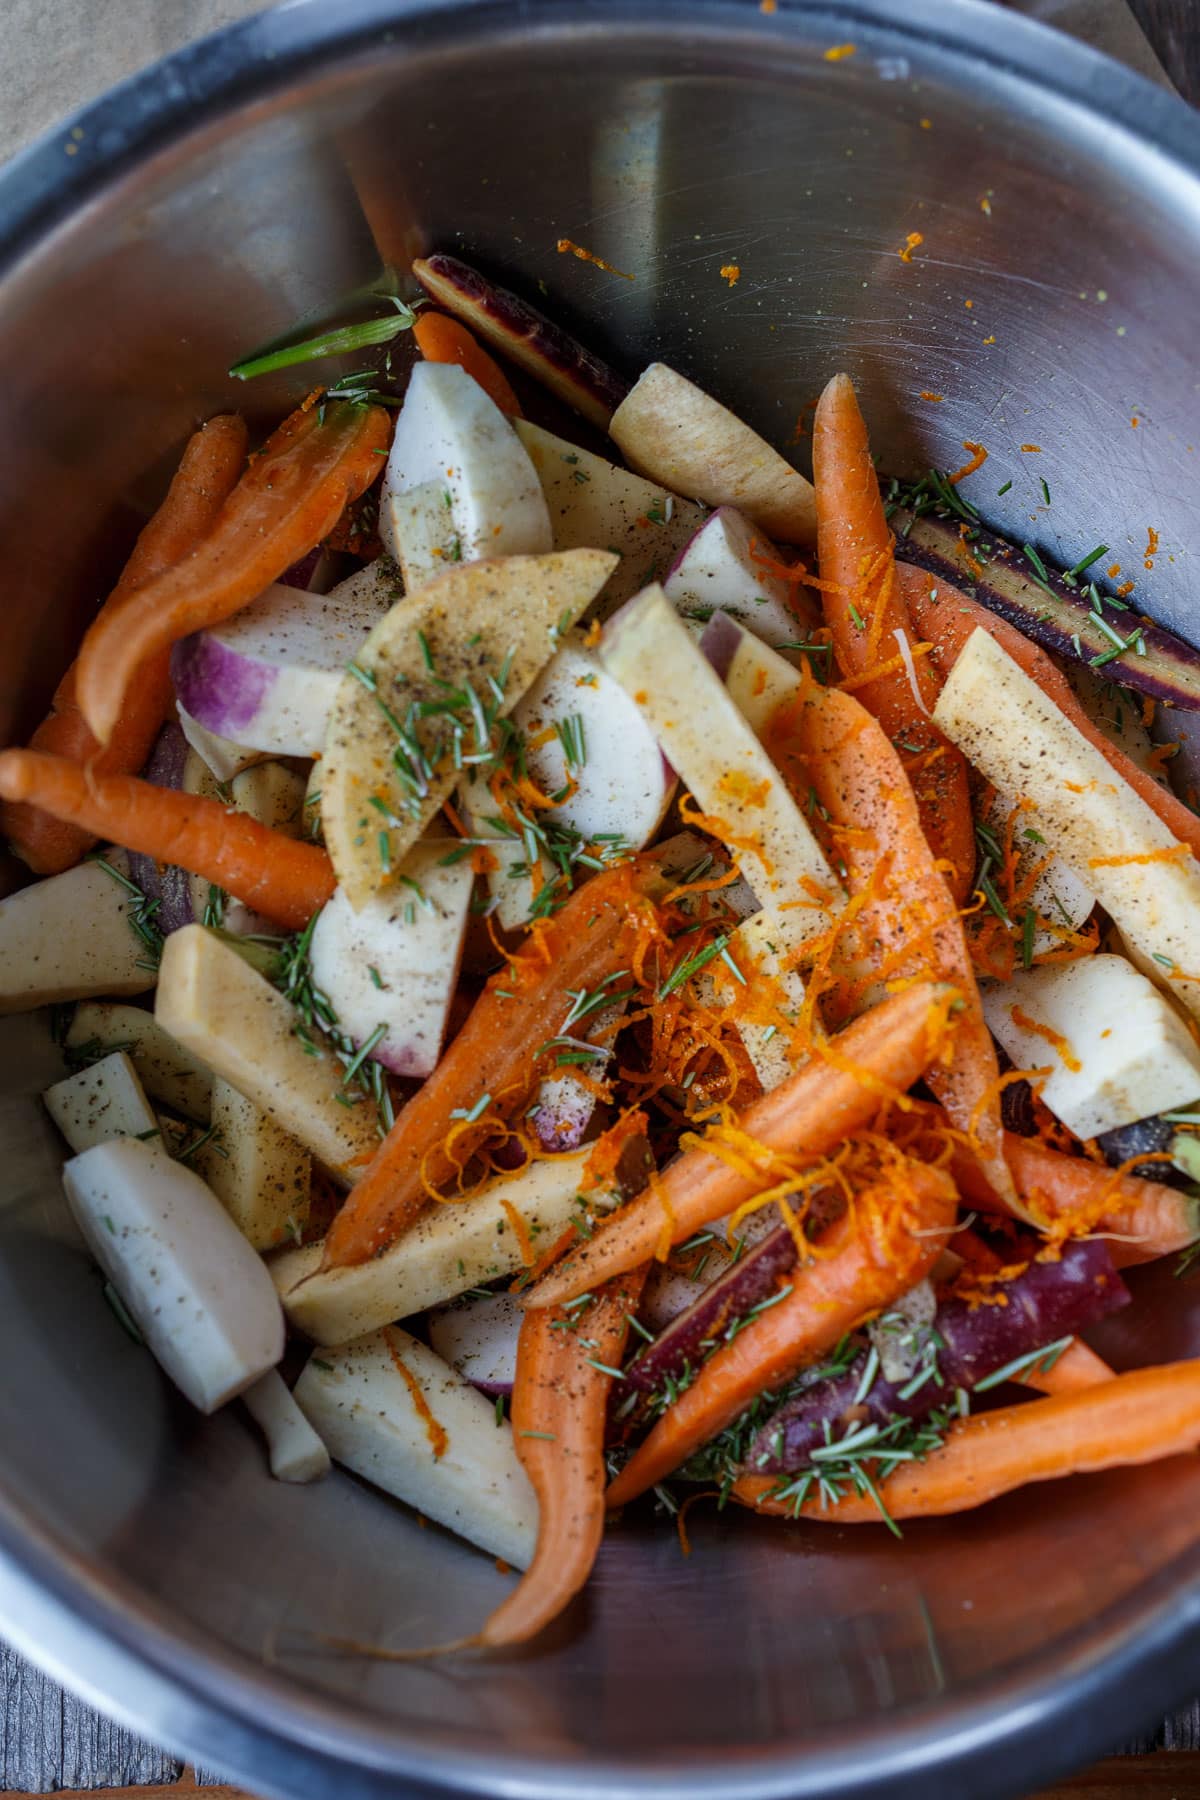 Sliced root vegetables in a bowl with orange zest and rosemary.